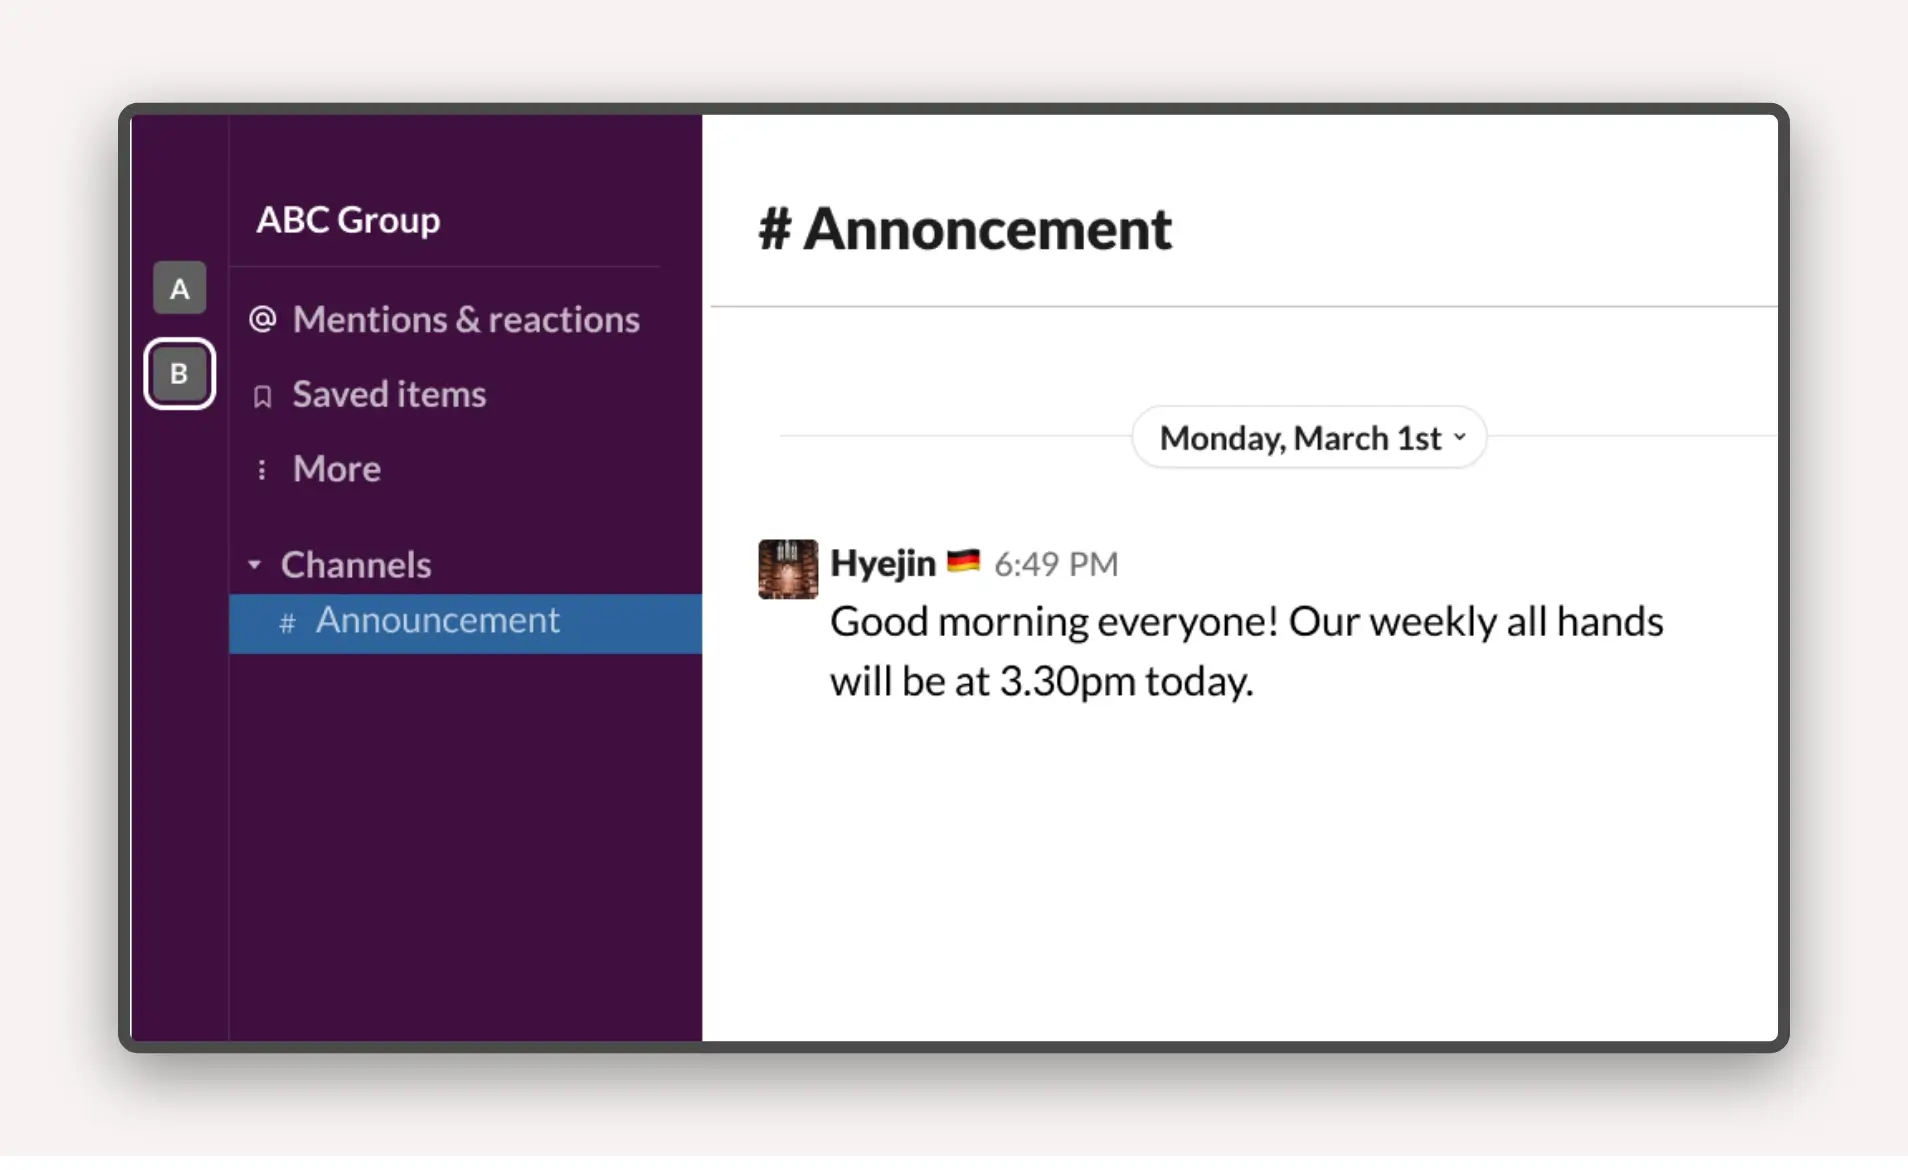 Digital signage slack app option to control the post frequency that can be displayed.